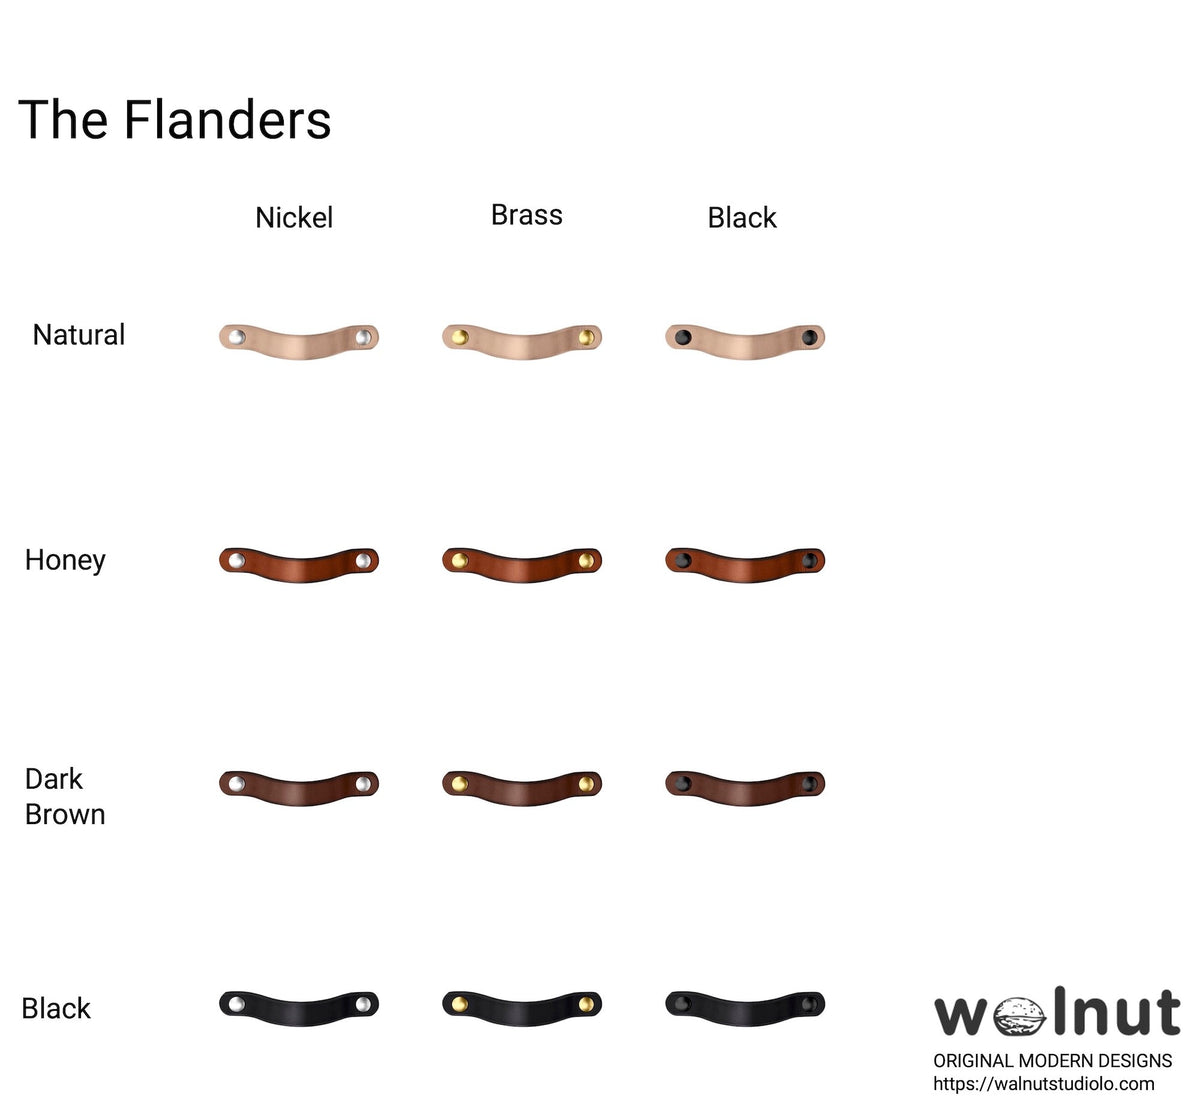 Walnut Studiolo Drawer Pulls AS-IS SALE Leather Handle - The Flanders - 3 Sizes 1 / Nickel Brass or Black (Specify in Notes)